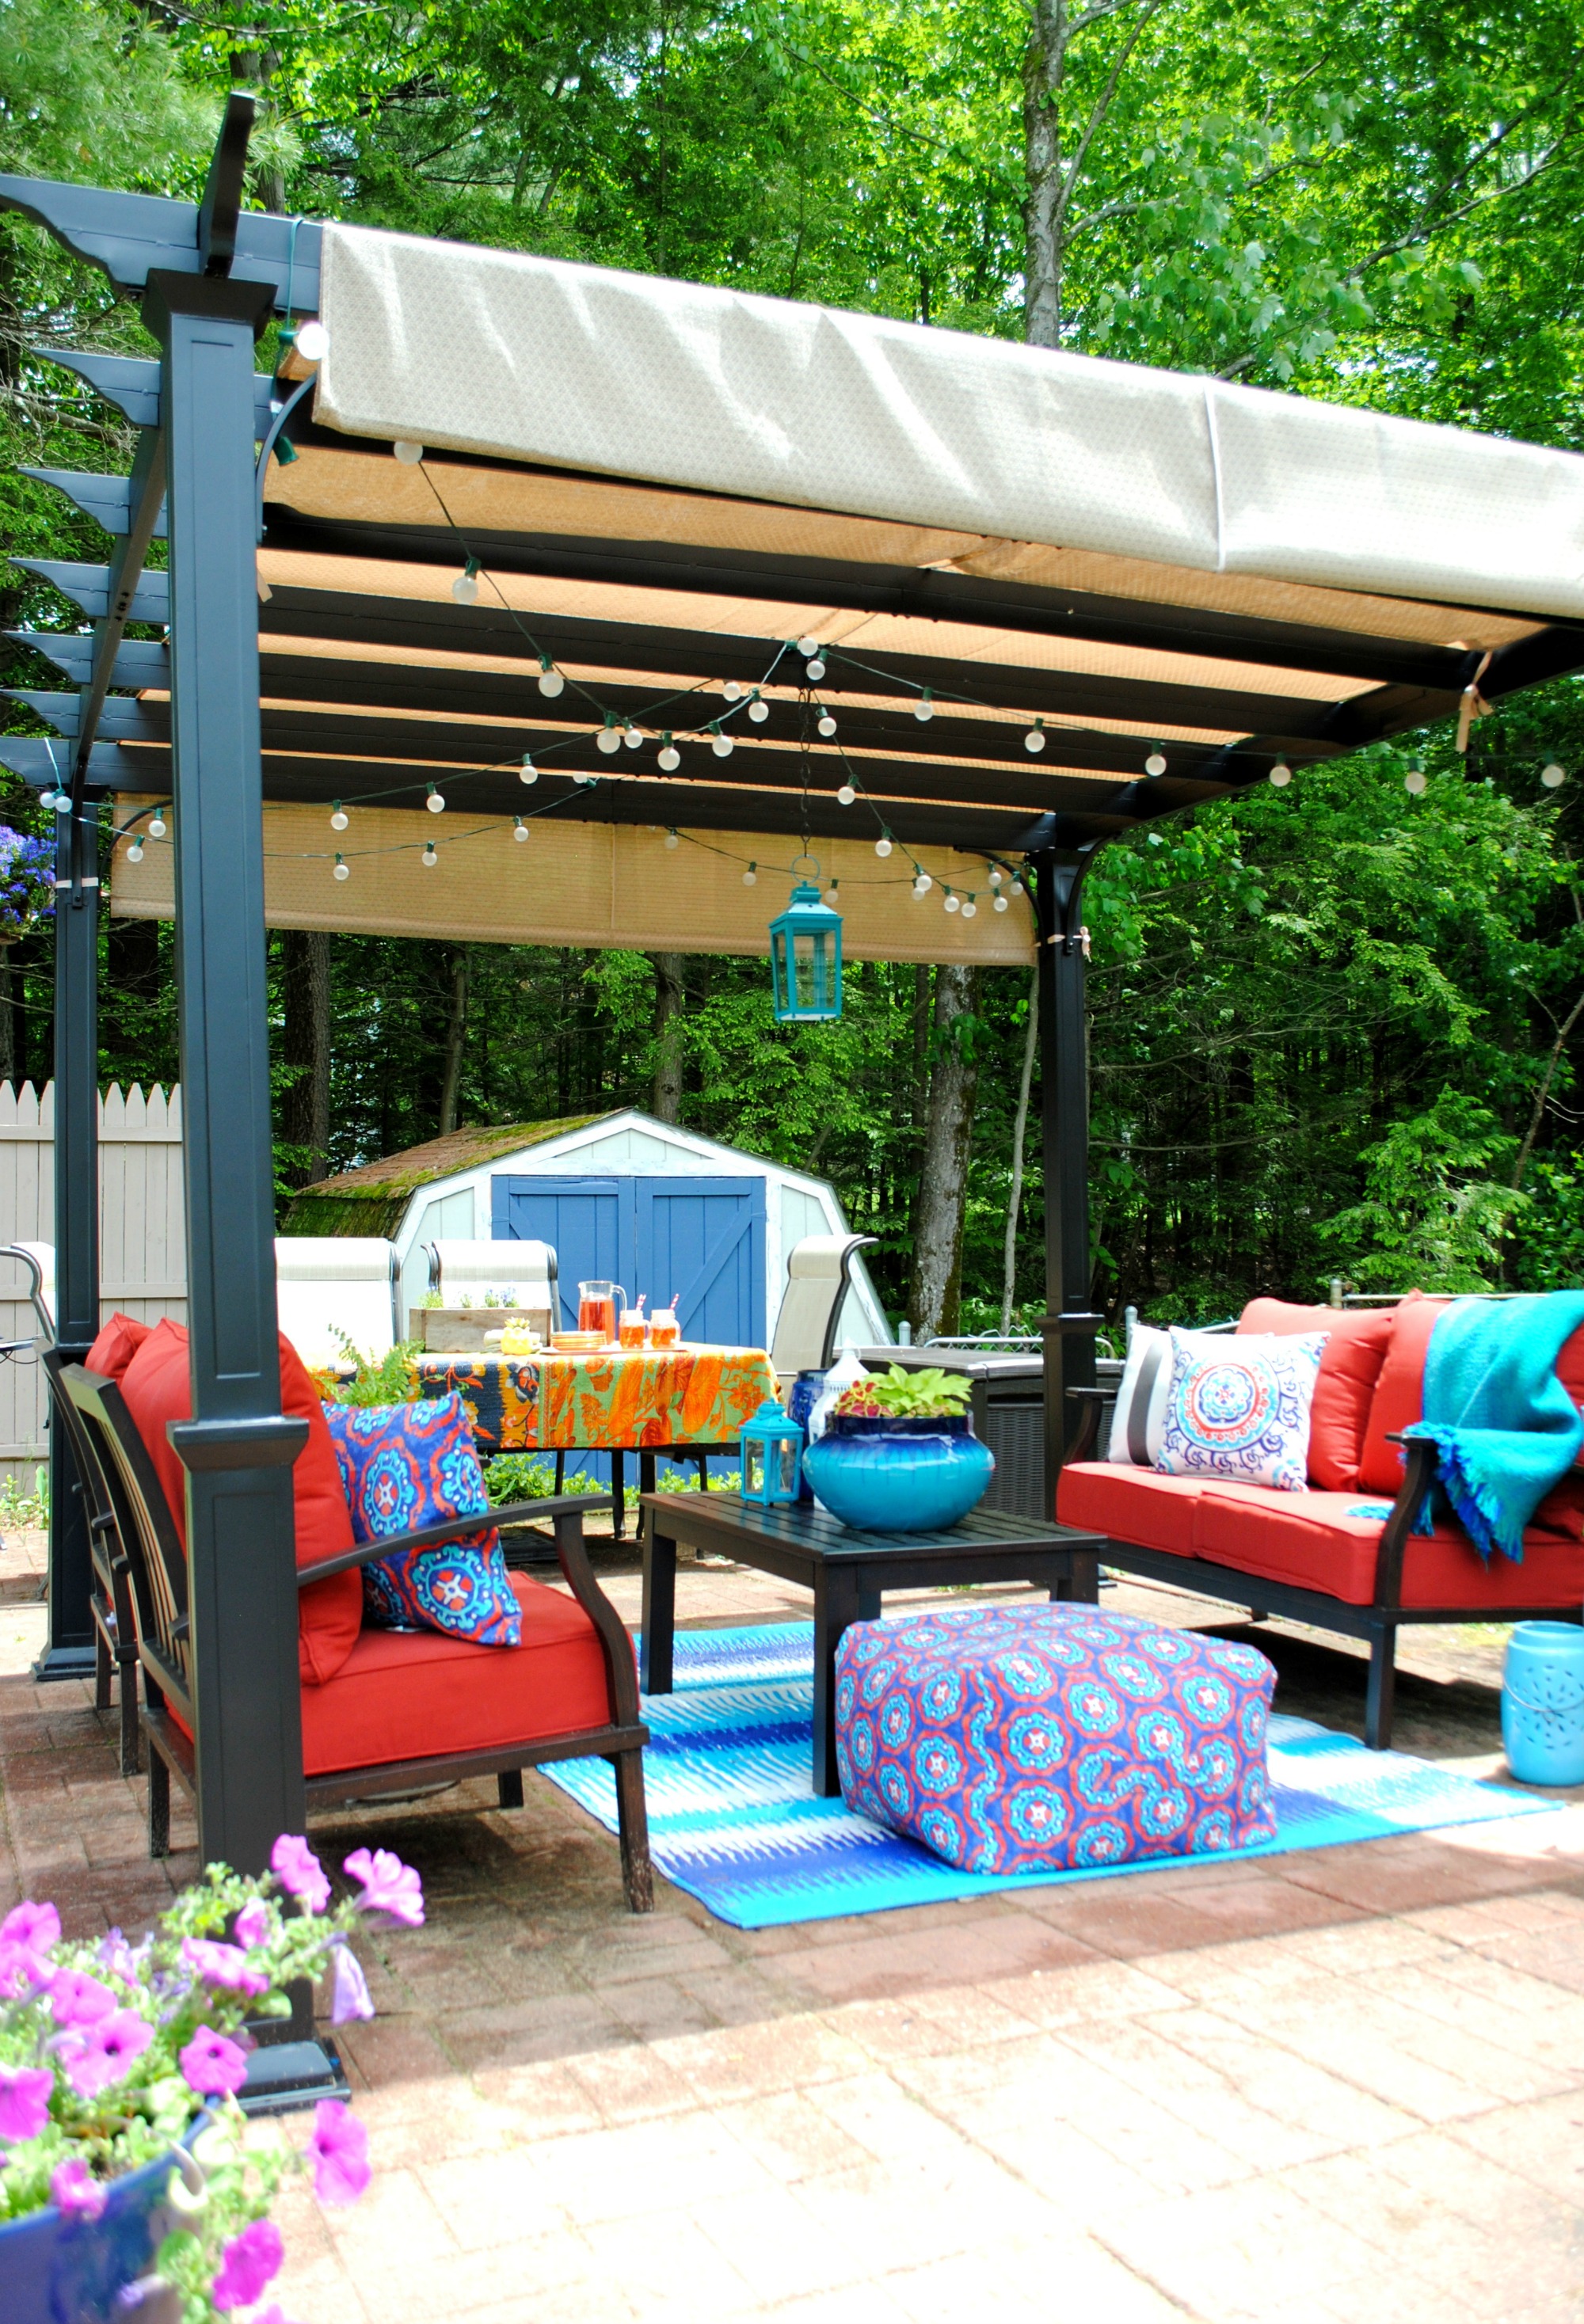 patio outdoor living space pergola paradise backyard creating makeover before after burger oasis summer caribbean style furniture revamped jenna surrounded